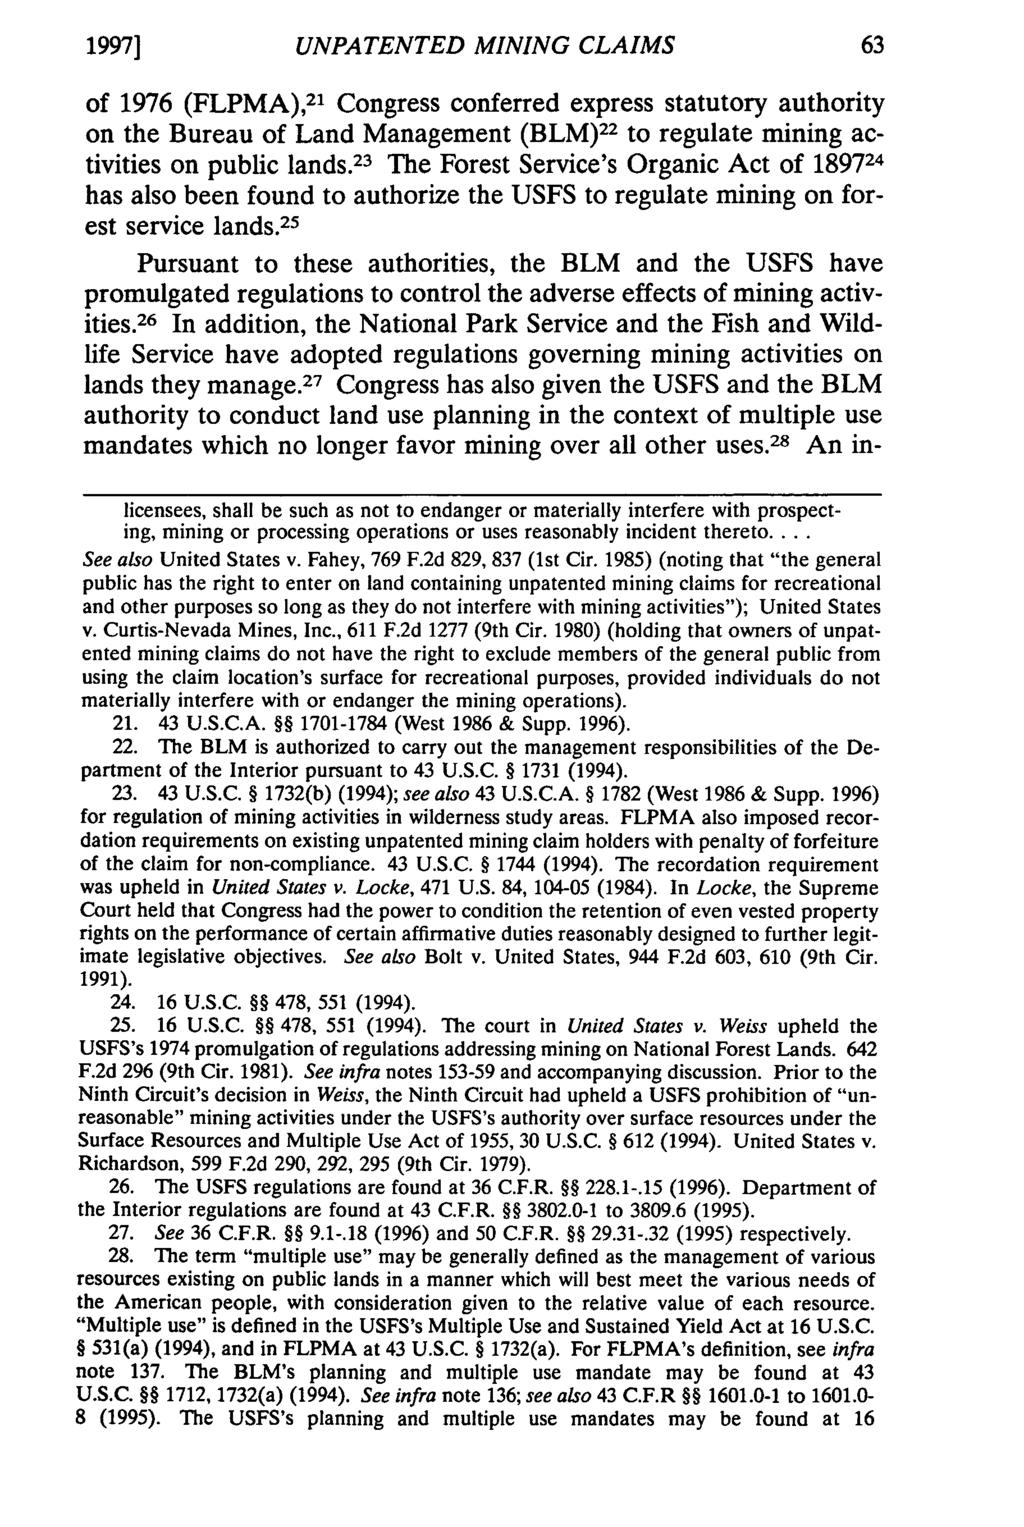 1997] UNPATENTED MINING CLAIMS of 1976 (FLPMA), 21 Congress conferred express statutory authority on the Bureau of Land Management (BLM) 22 to regulate mining activities on public lands.